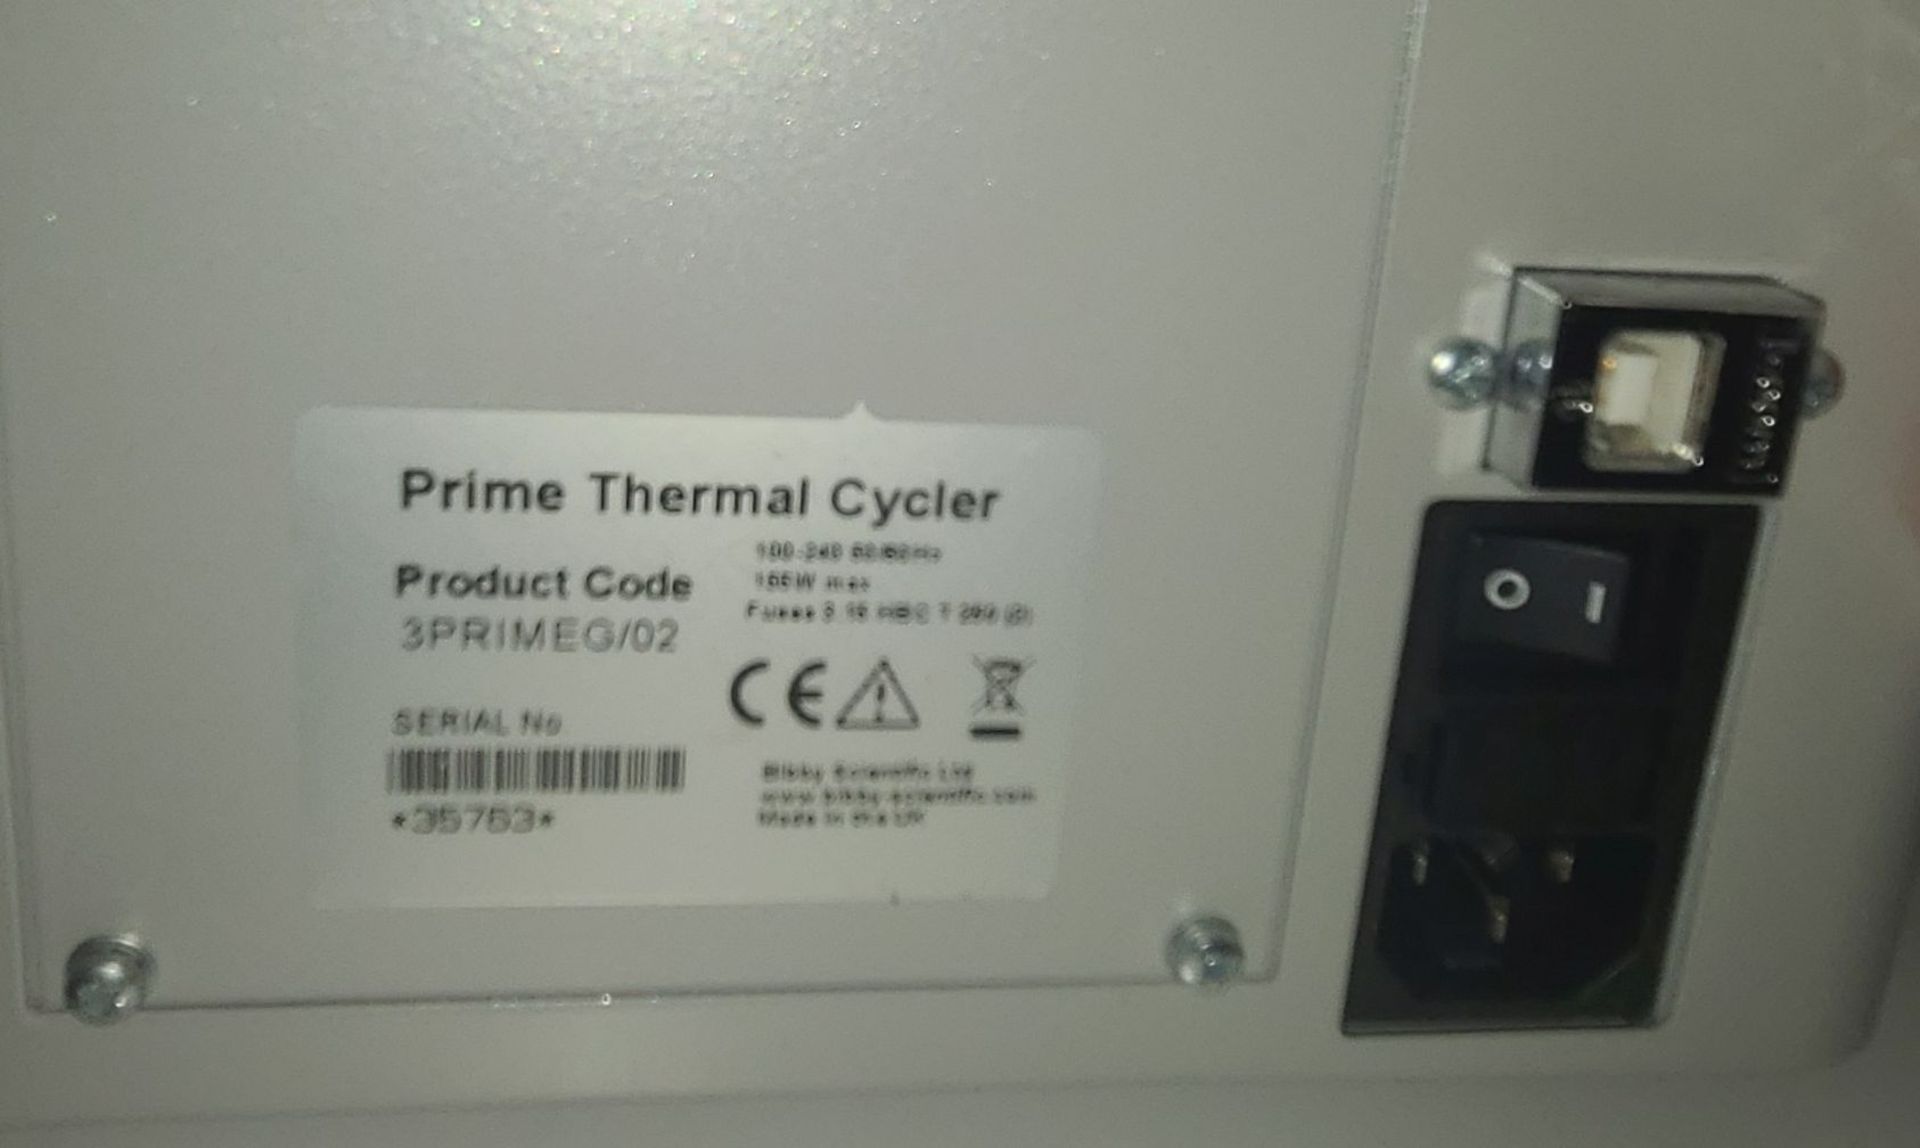 Prime Thermal Cycler - Image 2 of 6